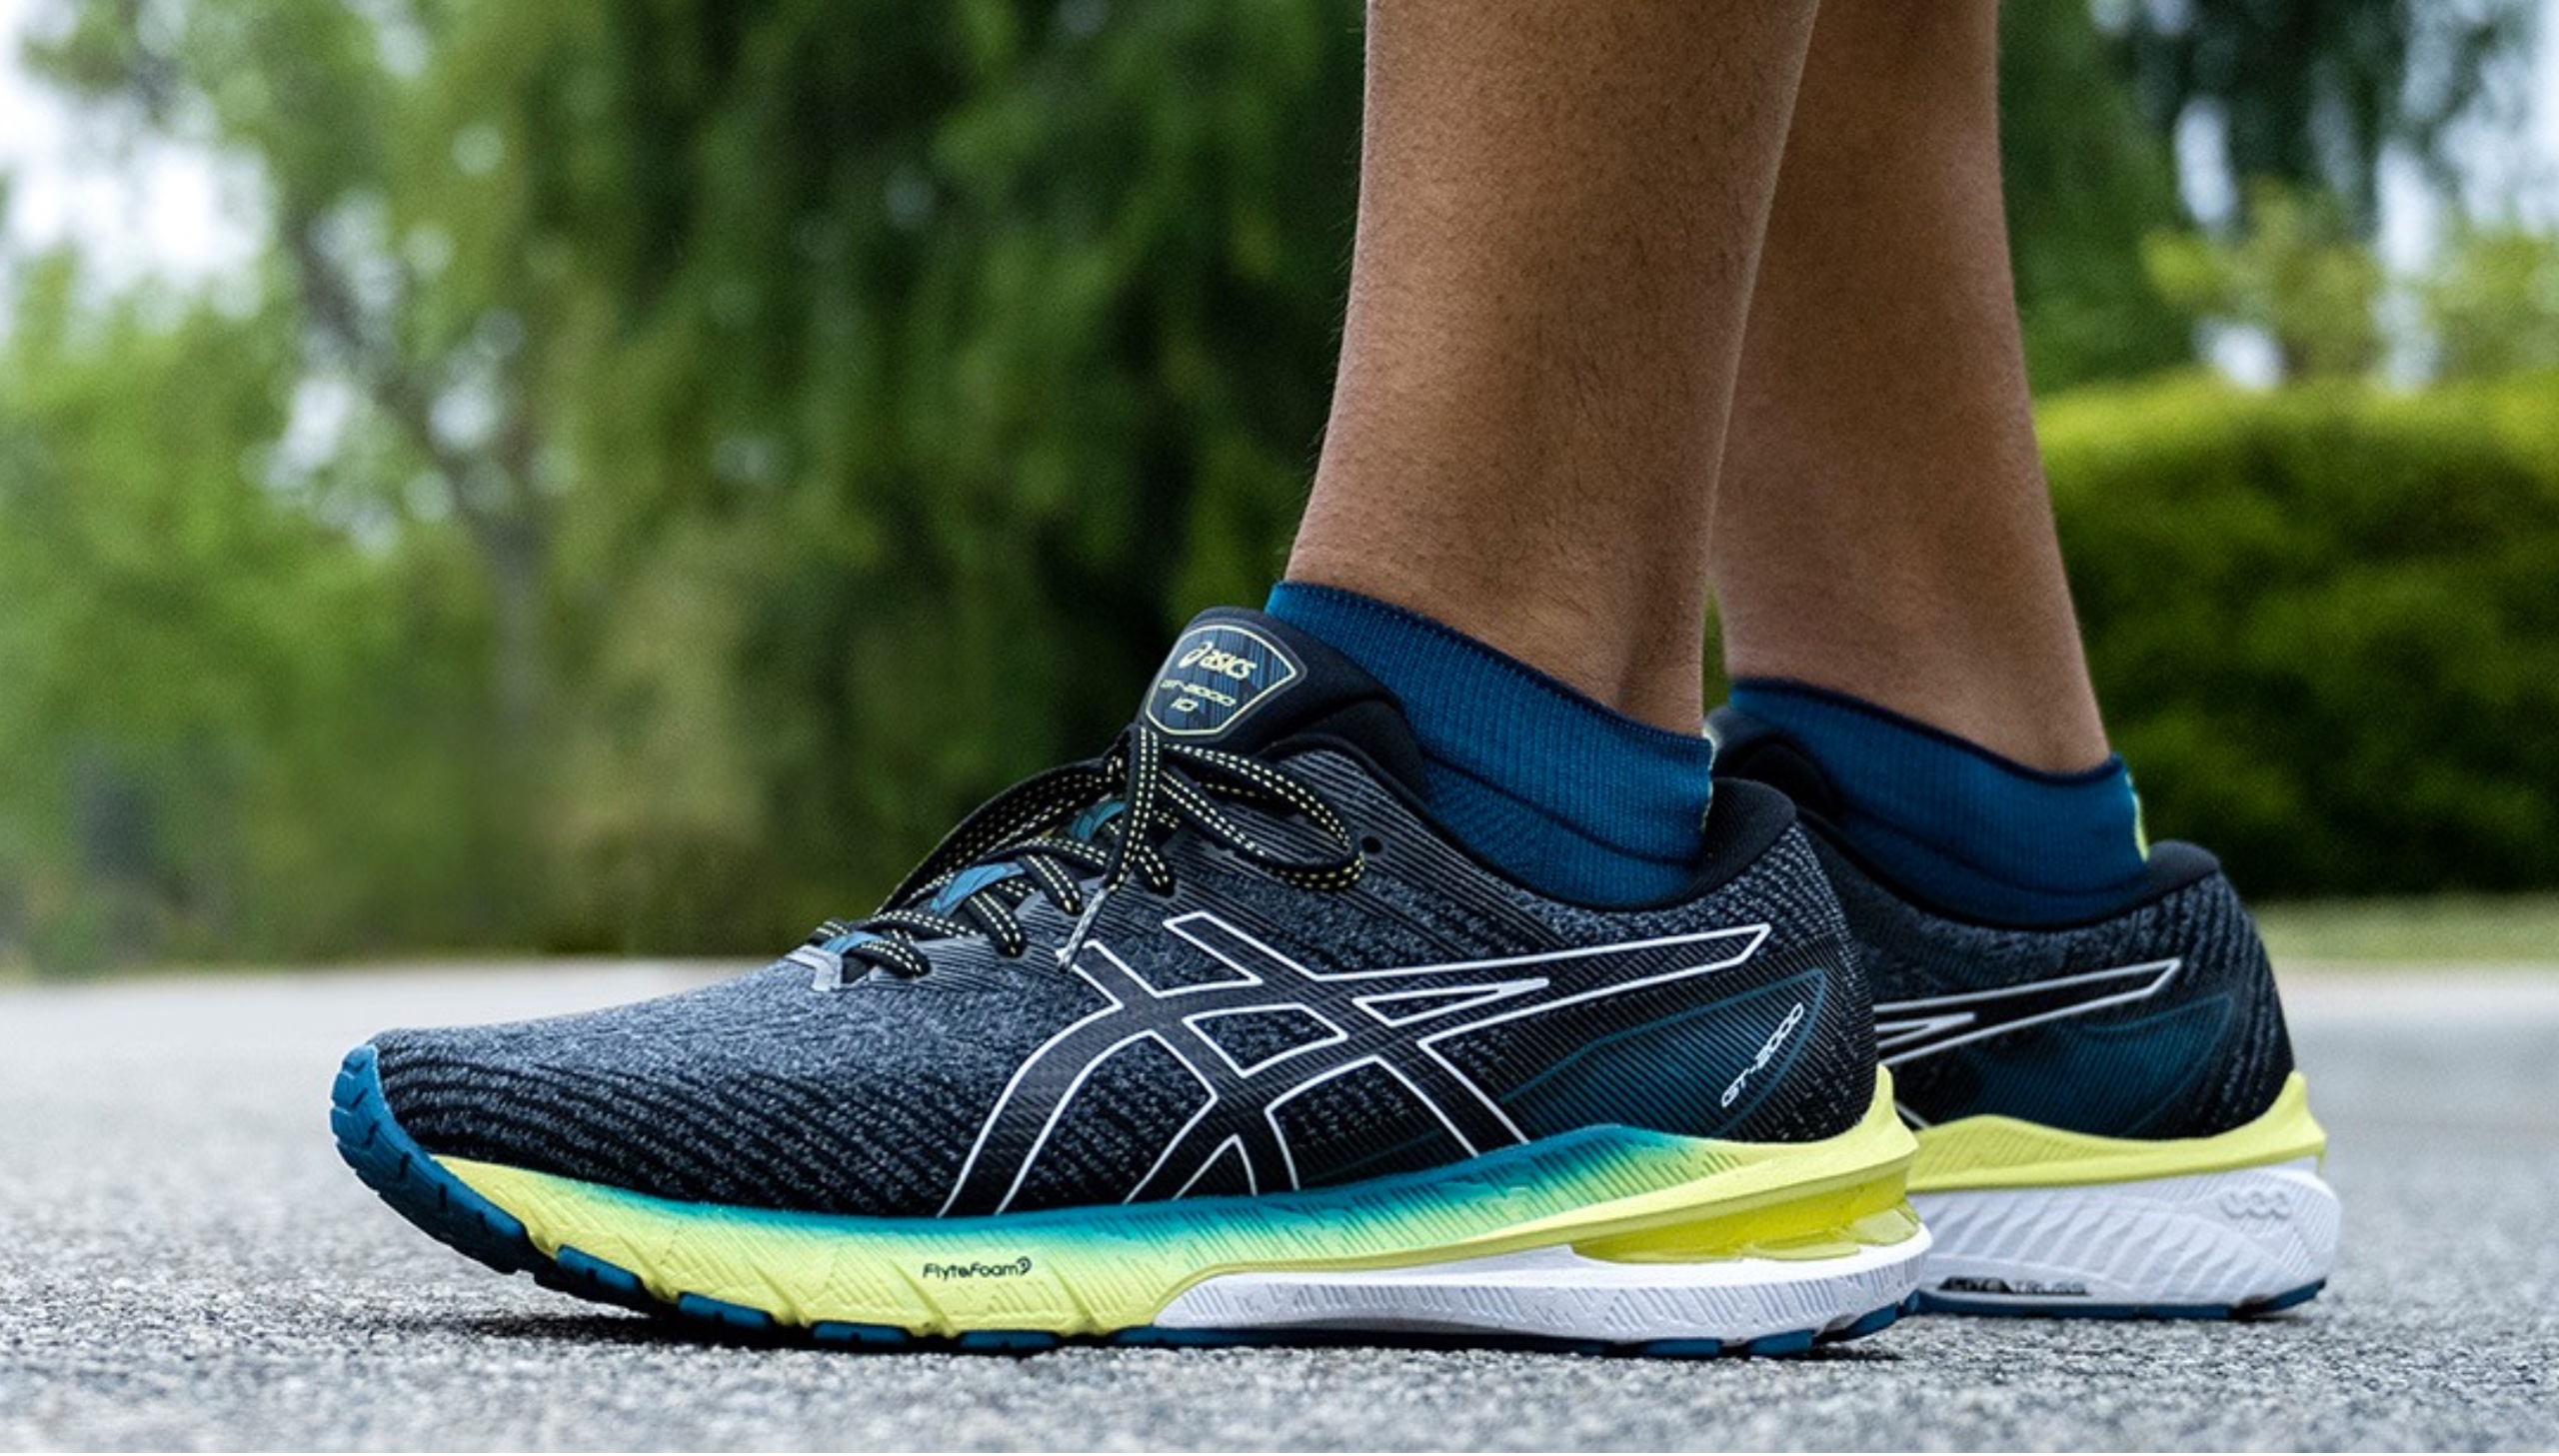 asics Semi-Annual Sale takes up to 50% off running shoes, apparel, more ...